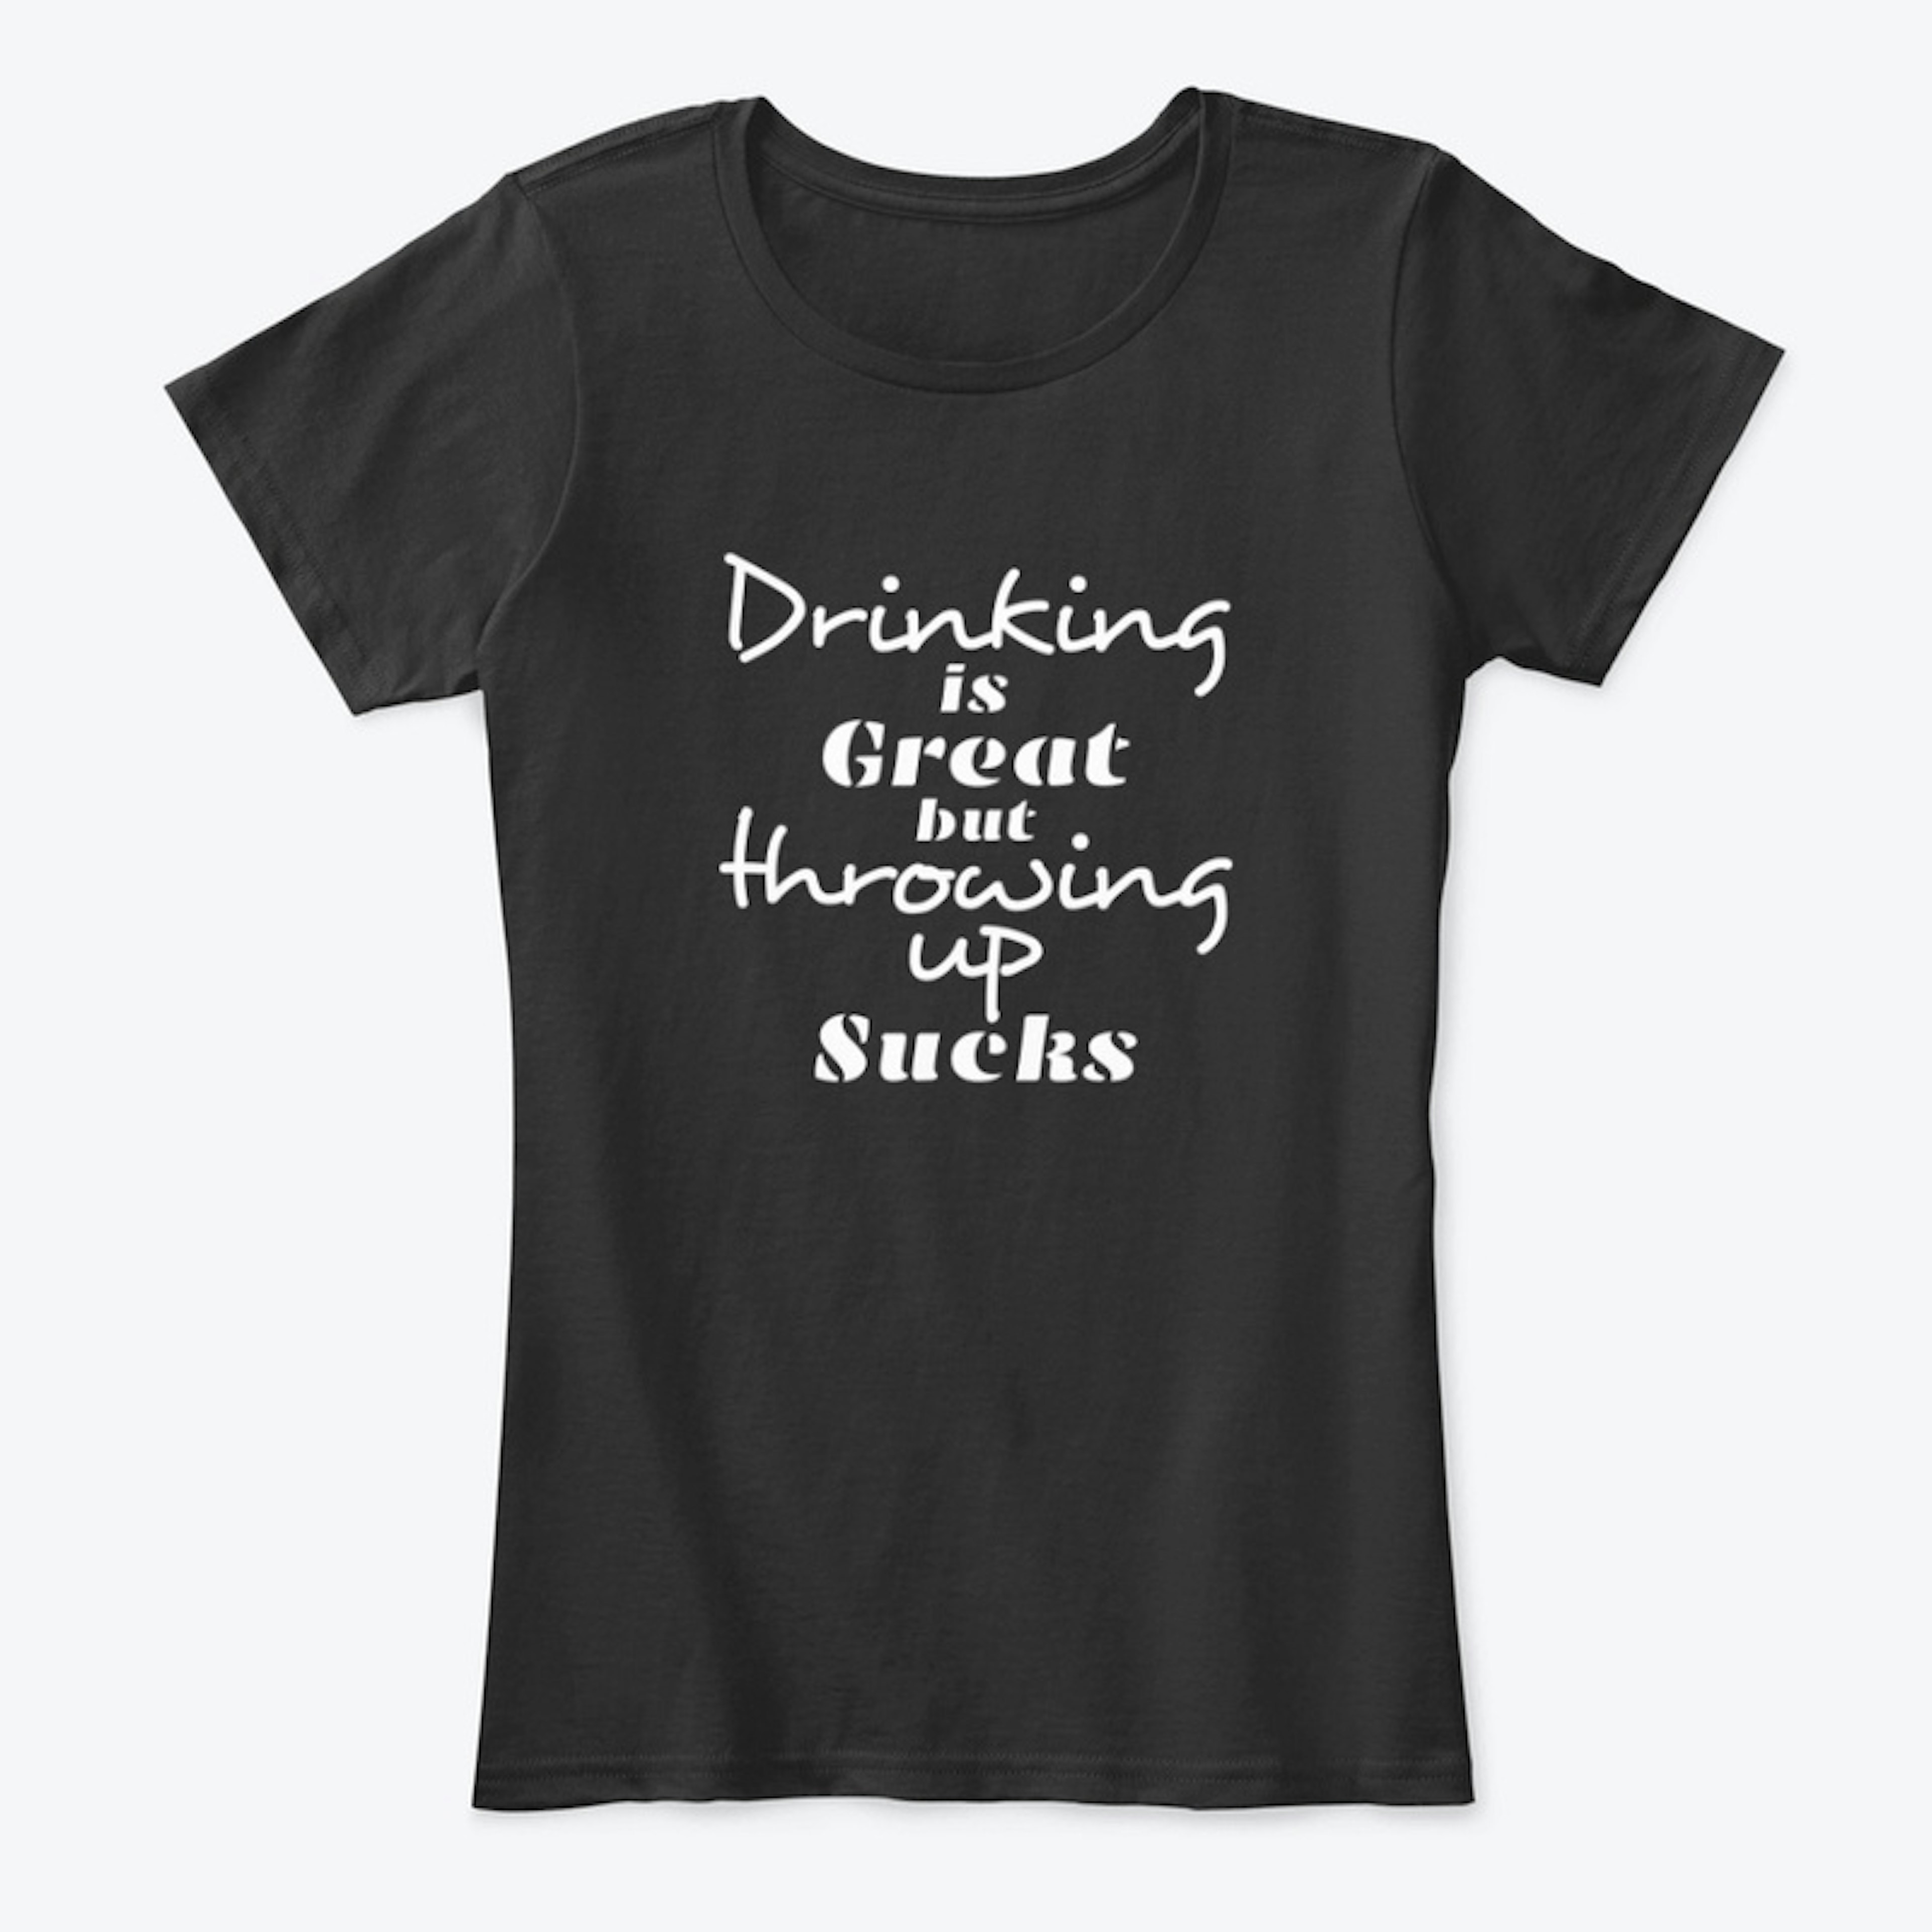 Drinking is Great but Throwing Up Sucks